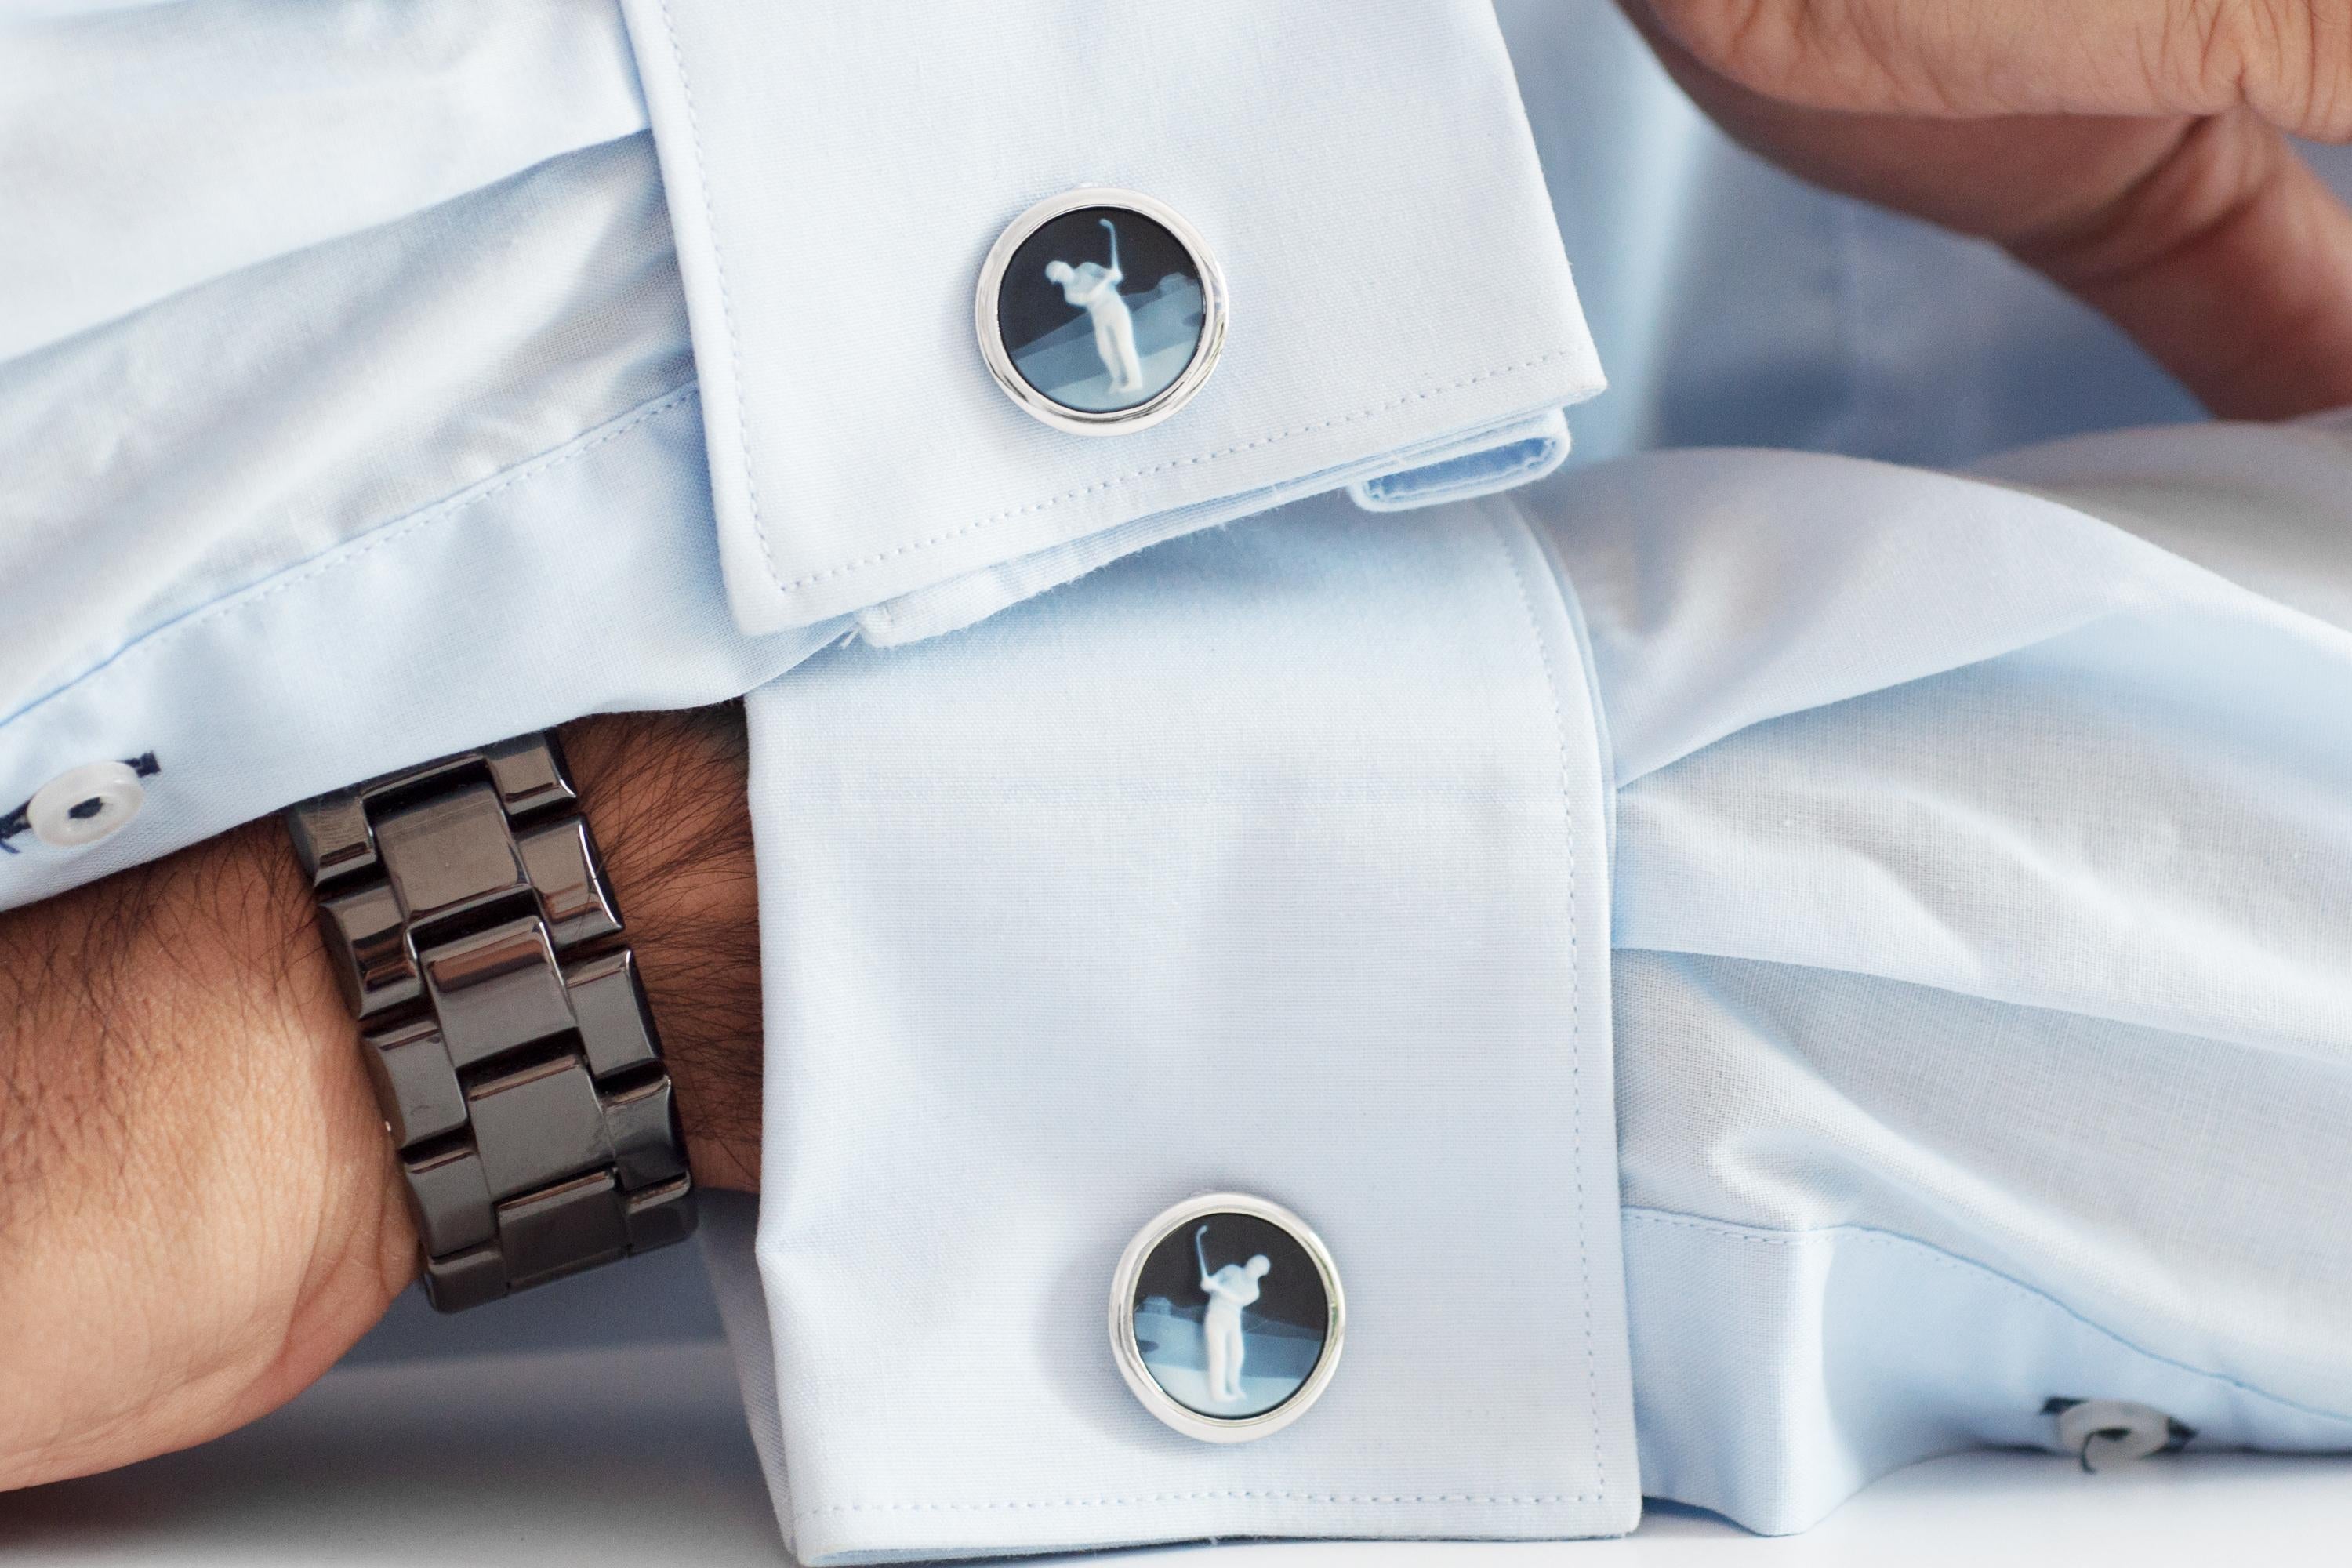 Sterling silver hand-carved chalcedony agate cameo golf cufflinks.

“The most important shot in golf is the next one”. Golf cufflinks are exclusively crafted for the delight of all those golf lovers. It celebrates the game of mind and character.